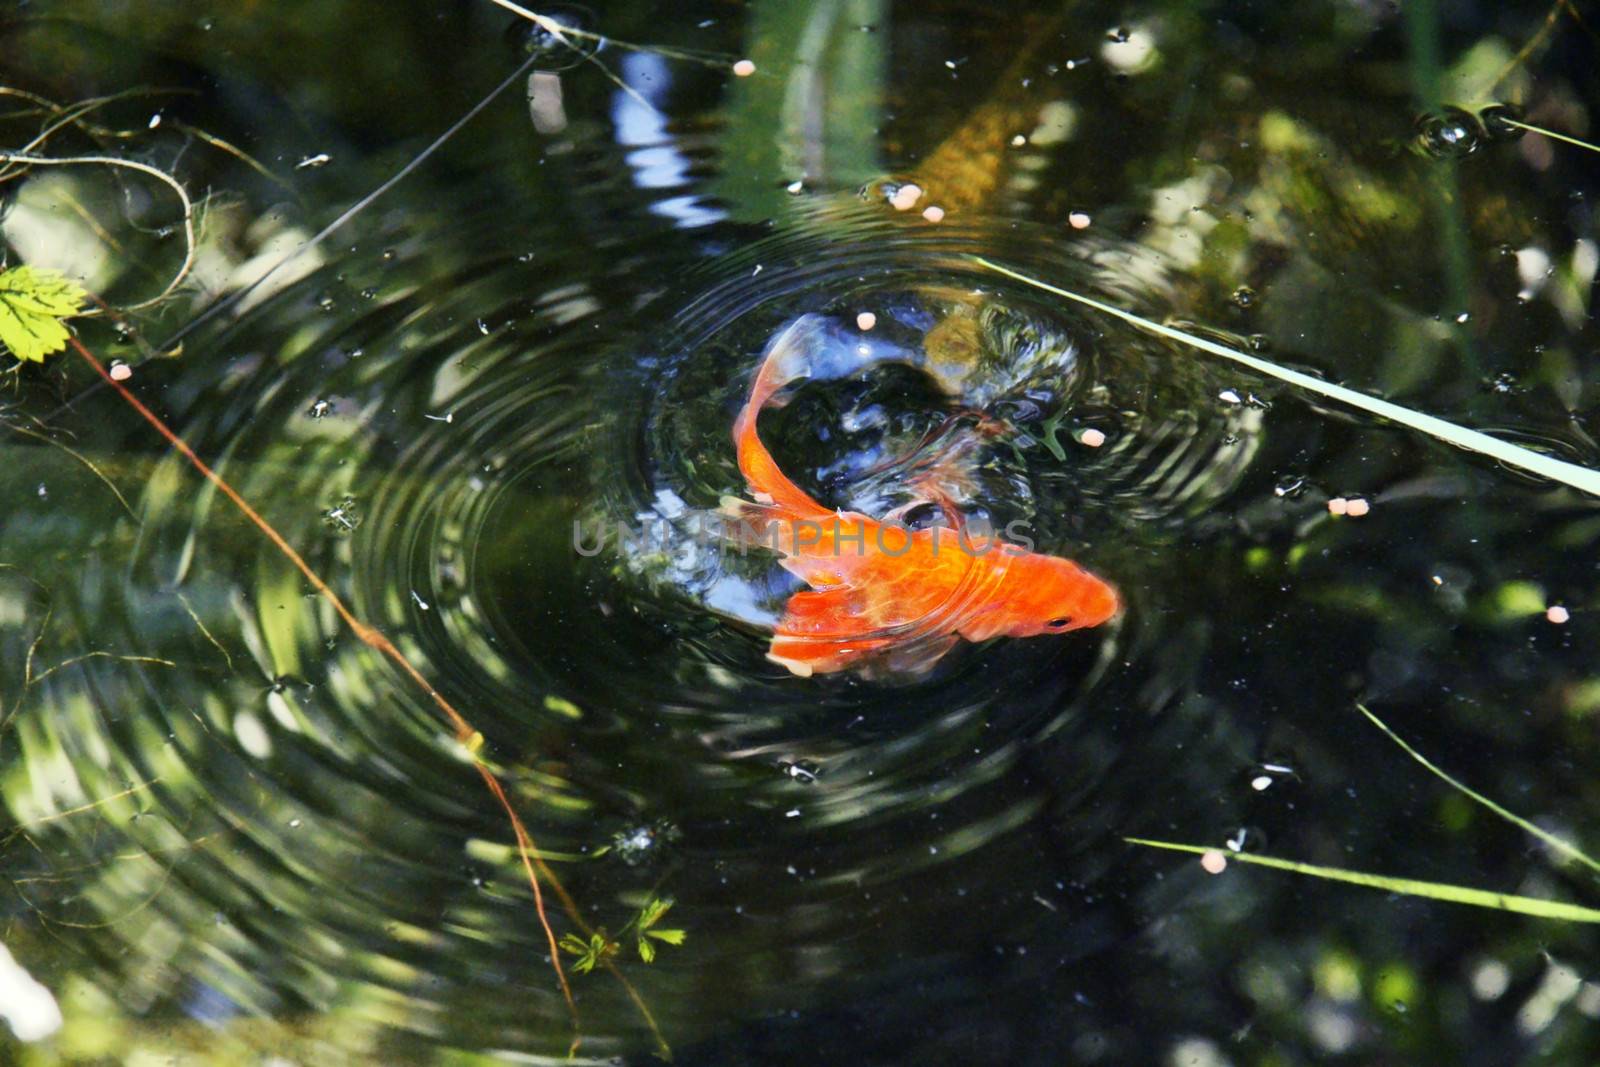 Artistic goldfish in water by Mirage3